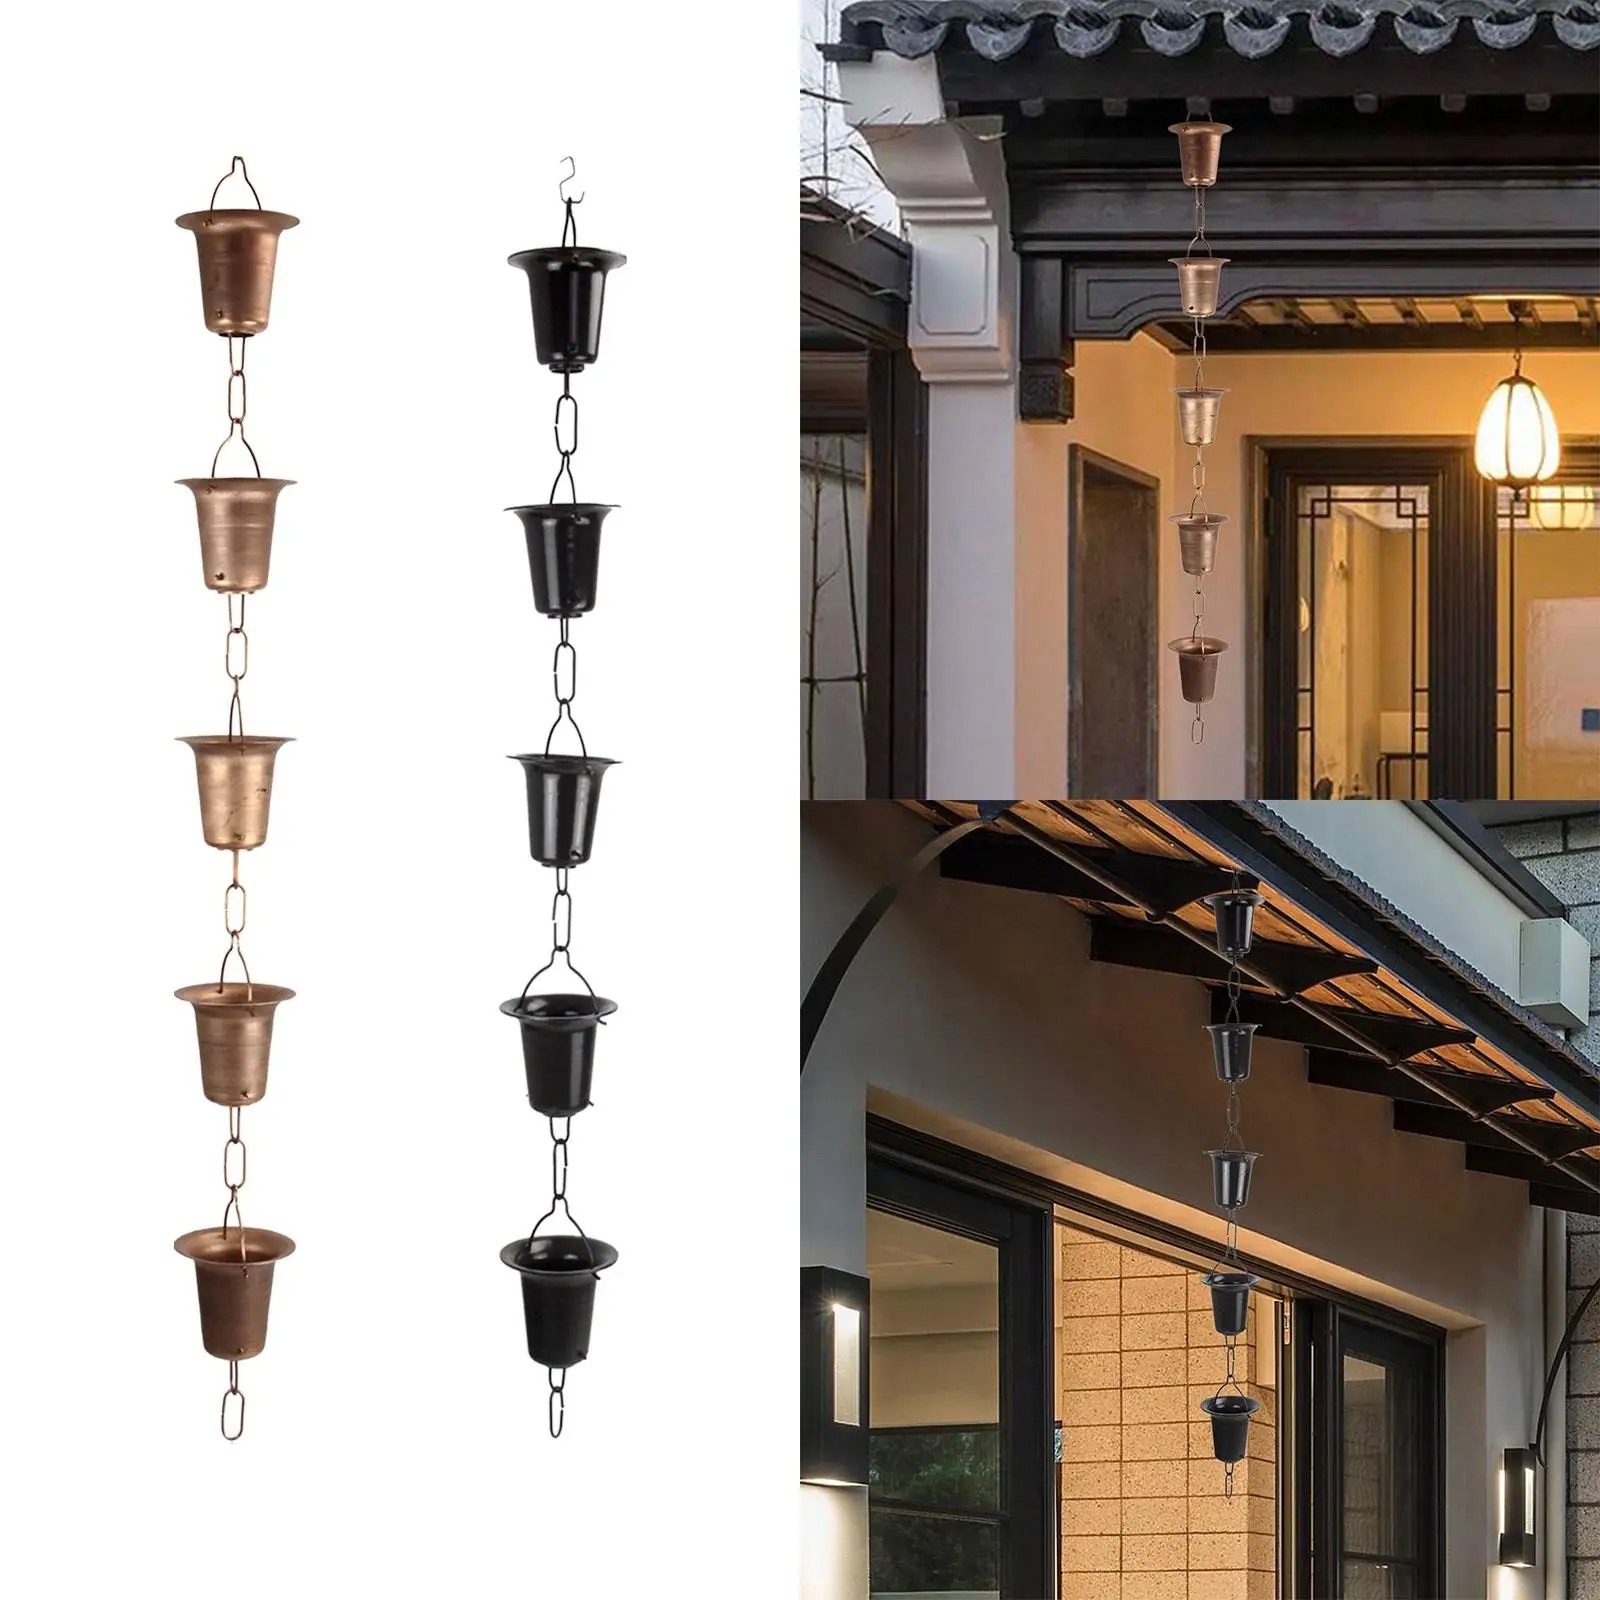 Rain Chains Cup Rain Chain Rain Collectors Cups Decorative Replacement Downspouts Outside for Roofs Gazebos Backyard Home Sheds